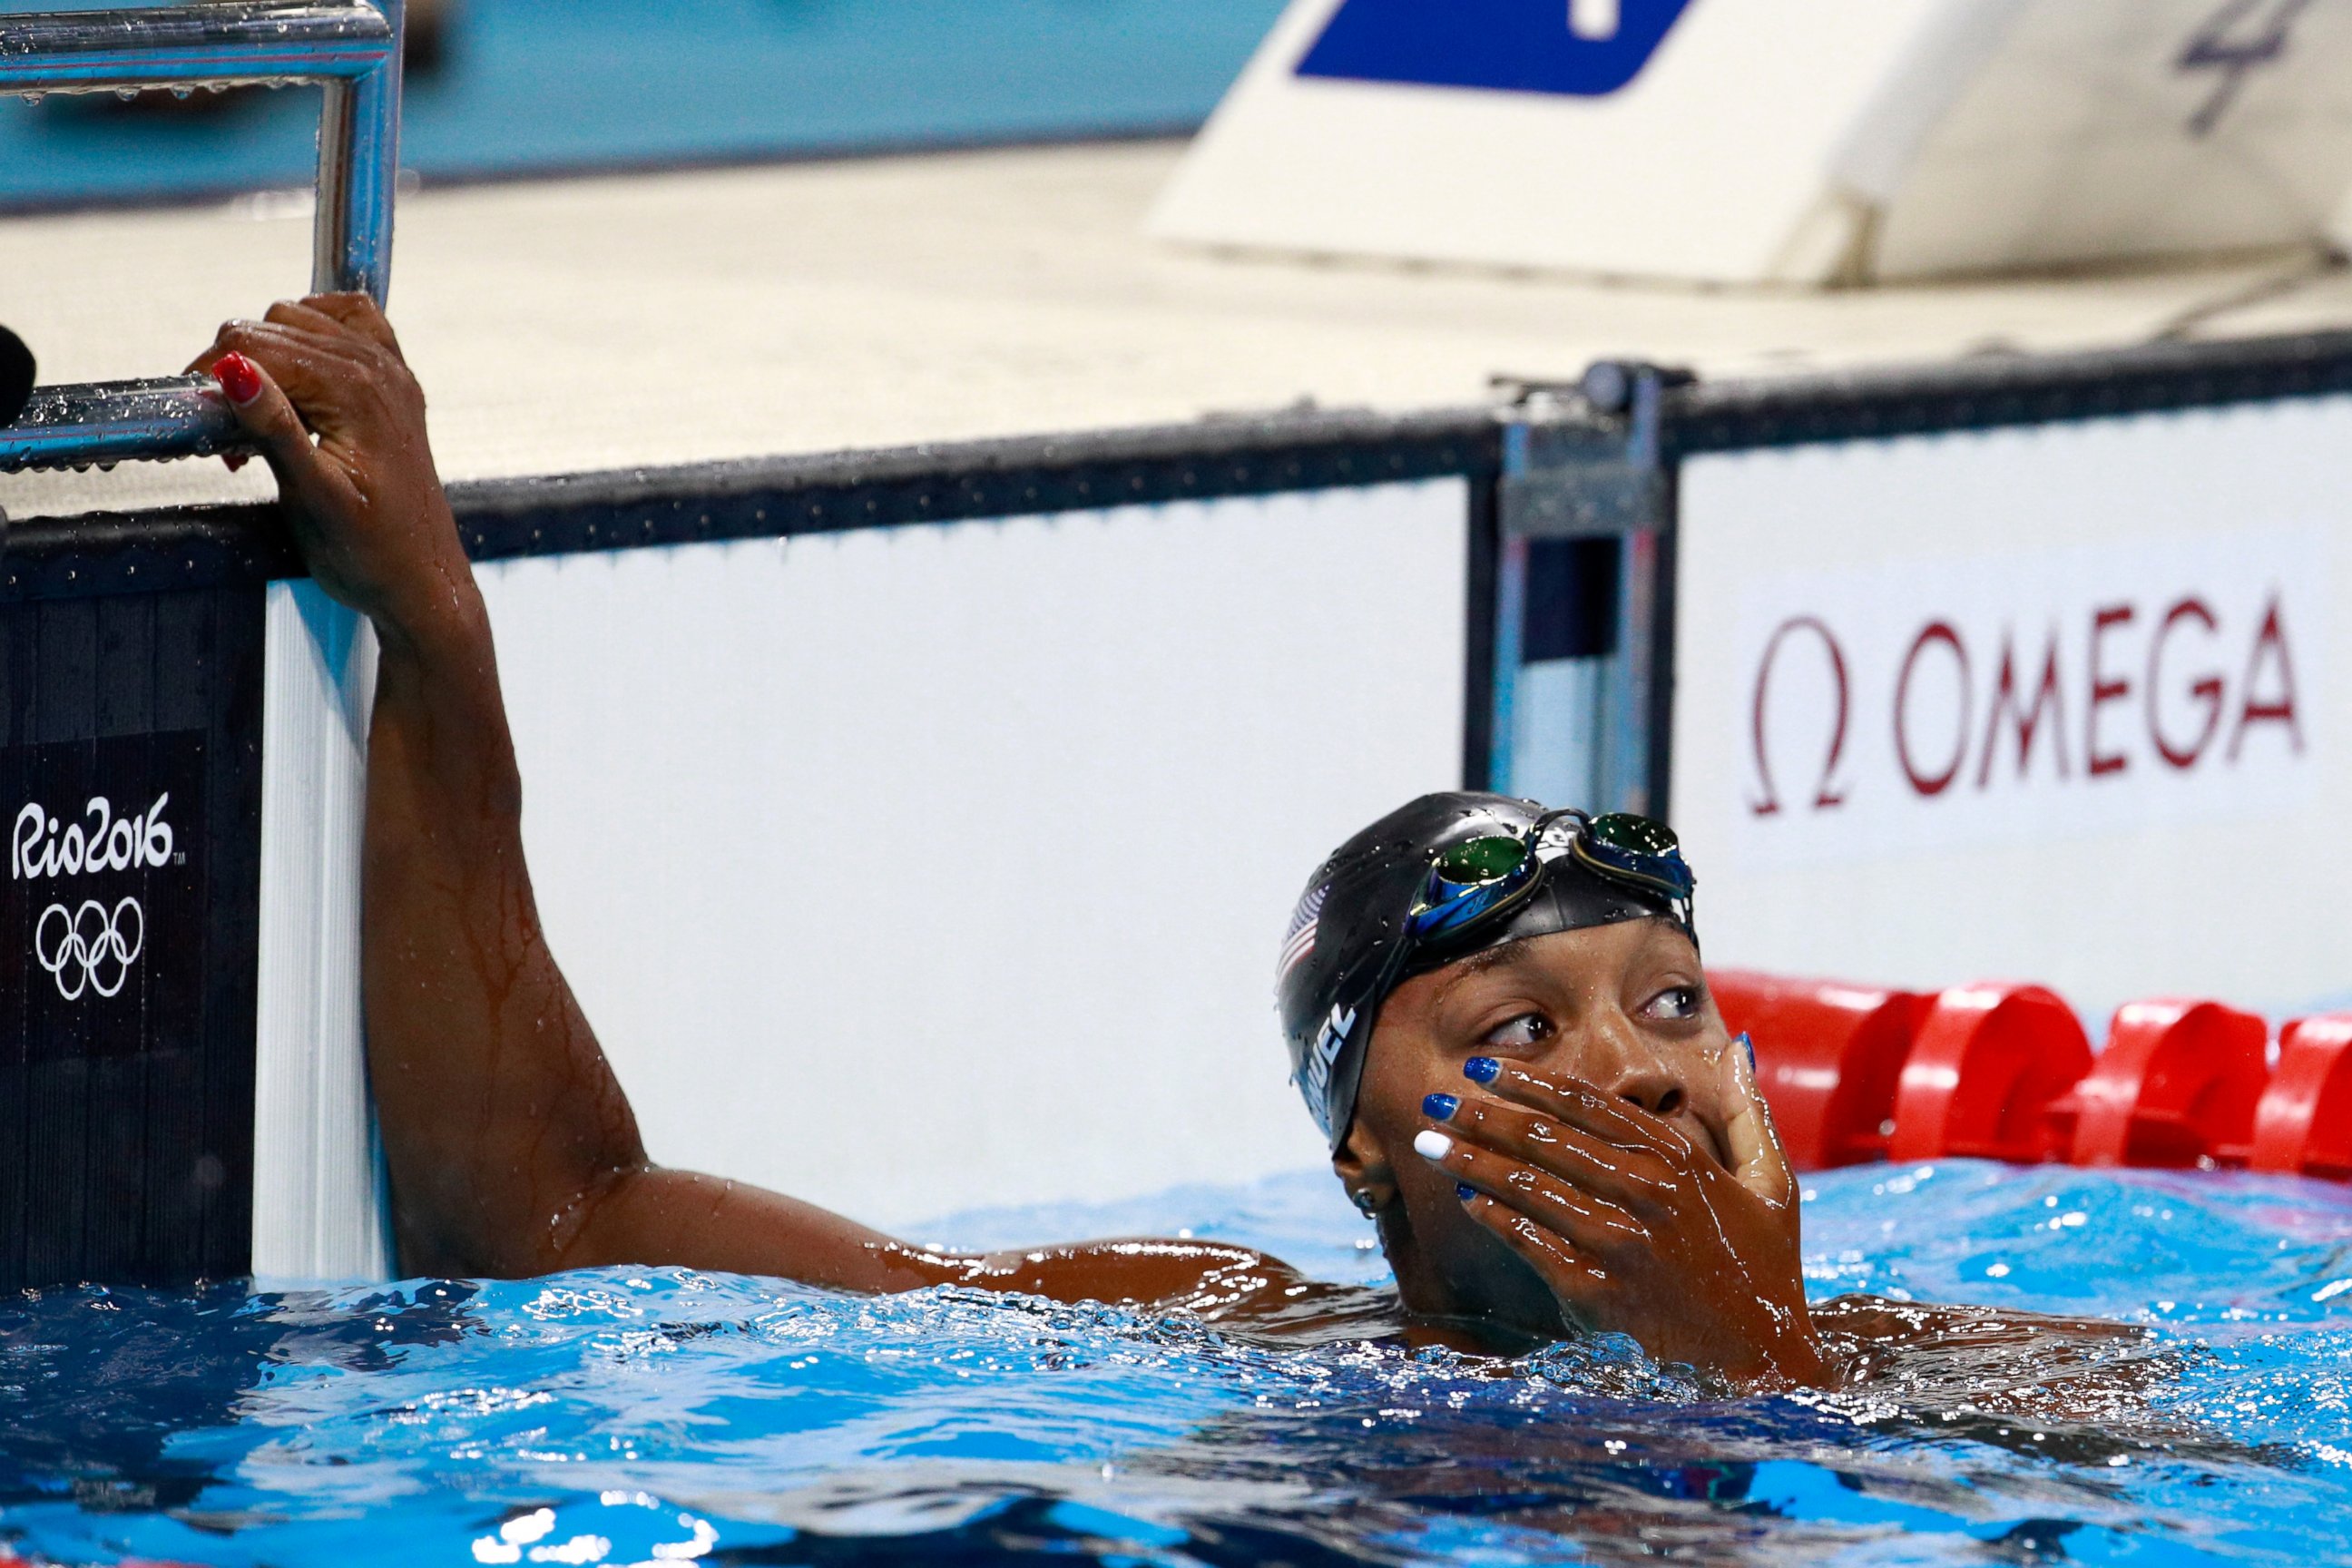 PHOTO: Simone Manuel of the United States celebrates winning gold in the Women's 100m freestyle final during the Rio 2016 Olympic Games, Aug. 11, 2016, in Rio de Janeiro.